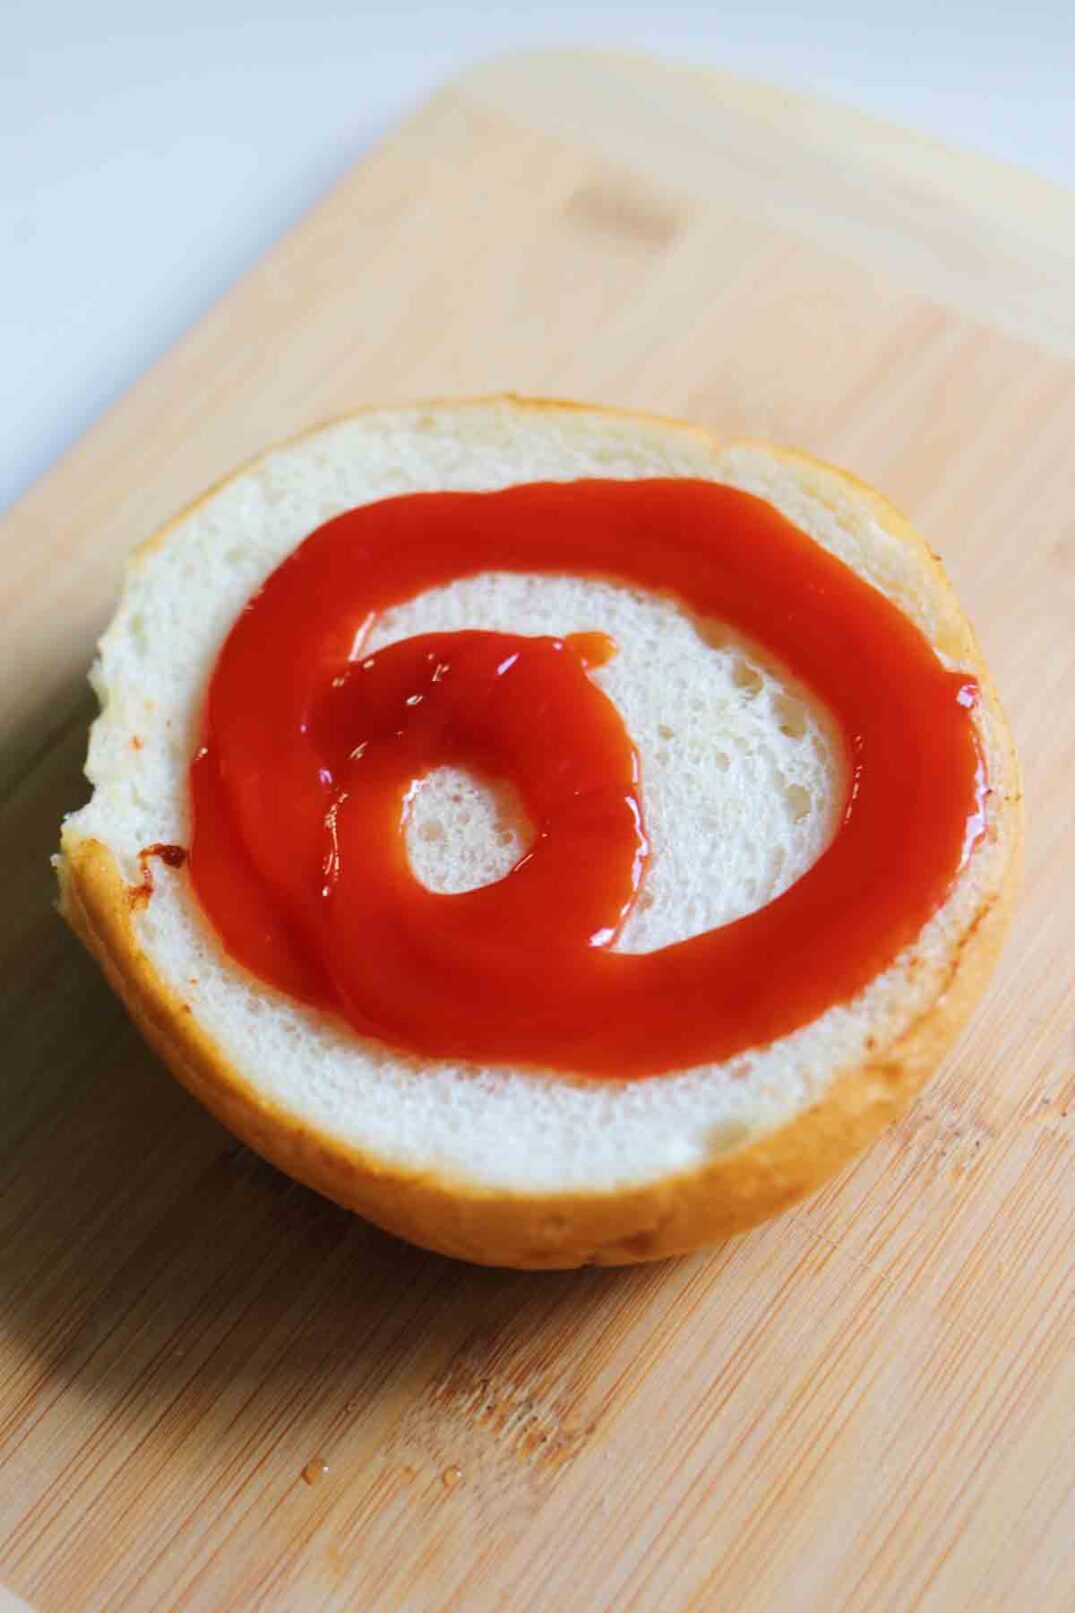 ketchup drizzled on the bottom half of a kaiser bun on a wooden cutting board.